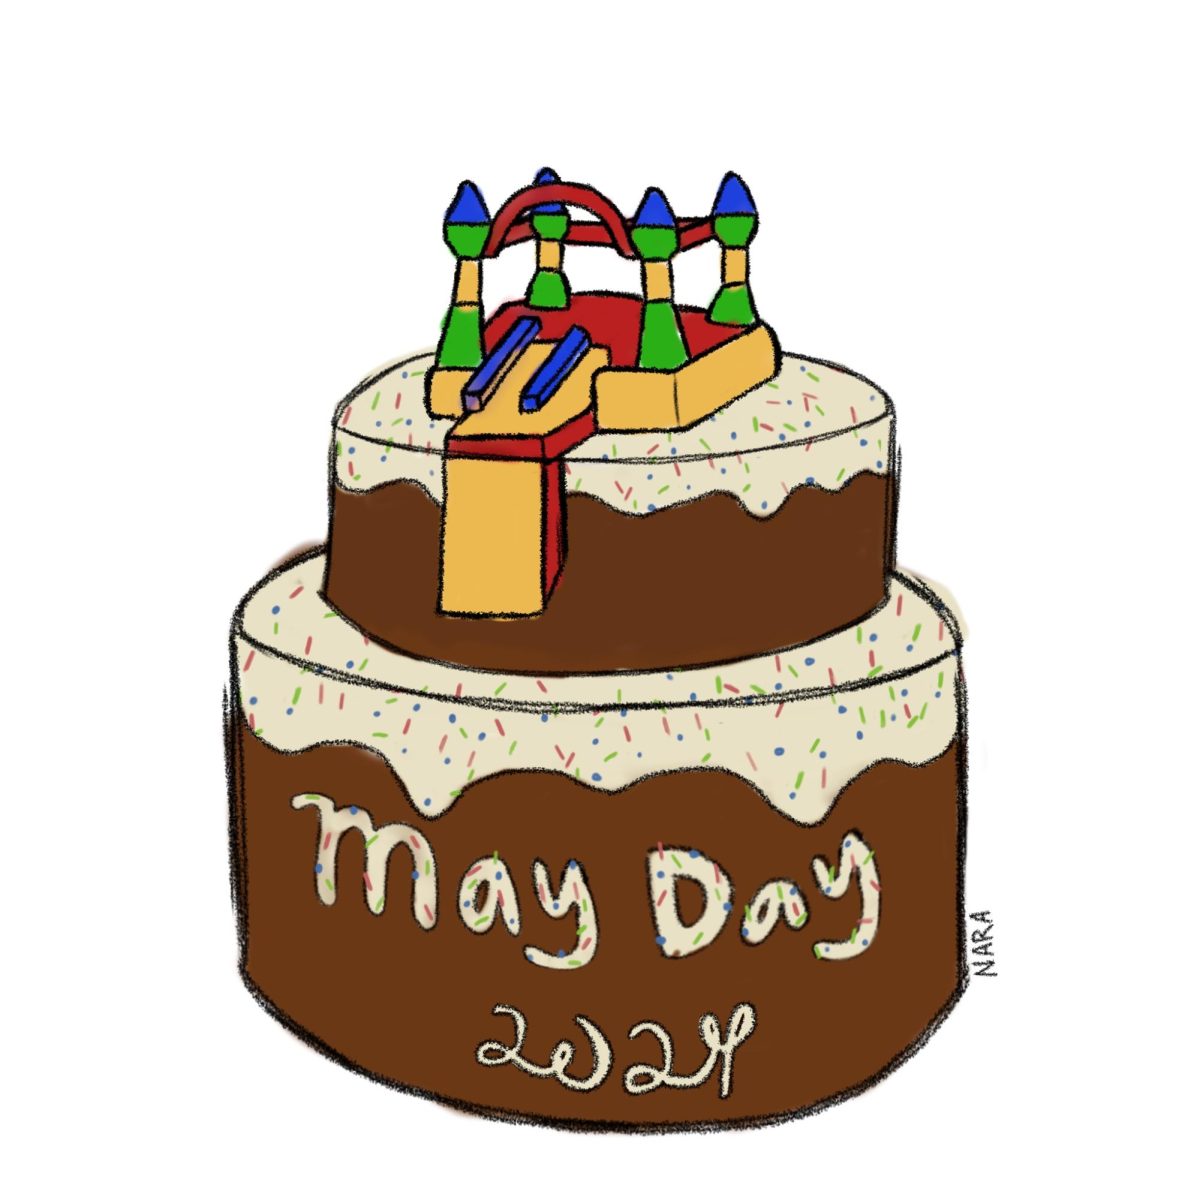 In addition to inflatable courses and games, May Day also
has a deliciously fun cake-baking competition.